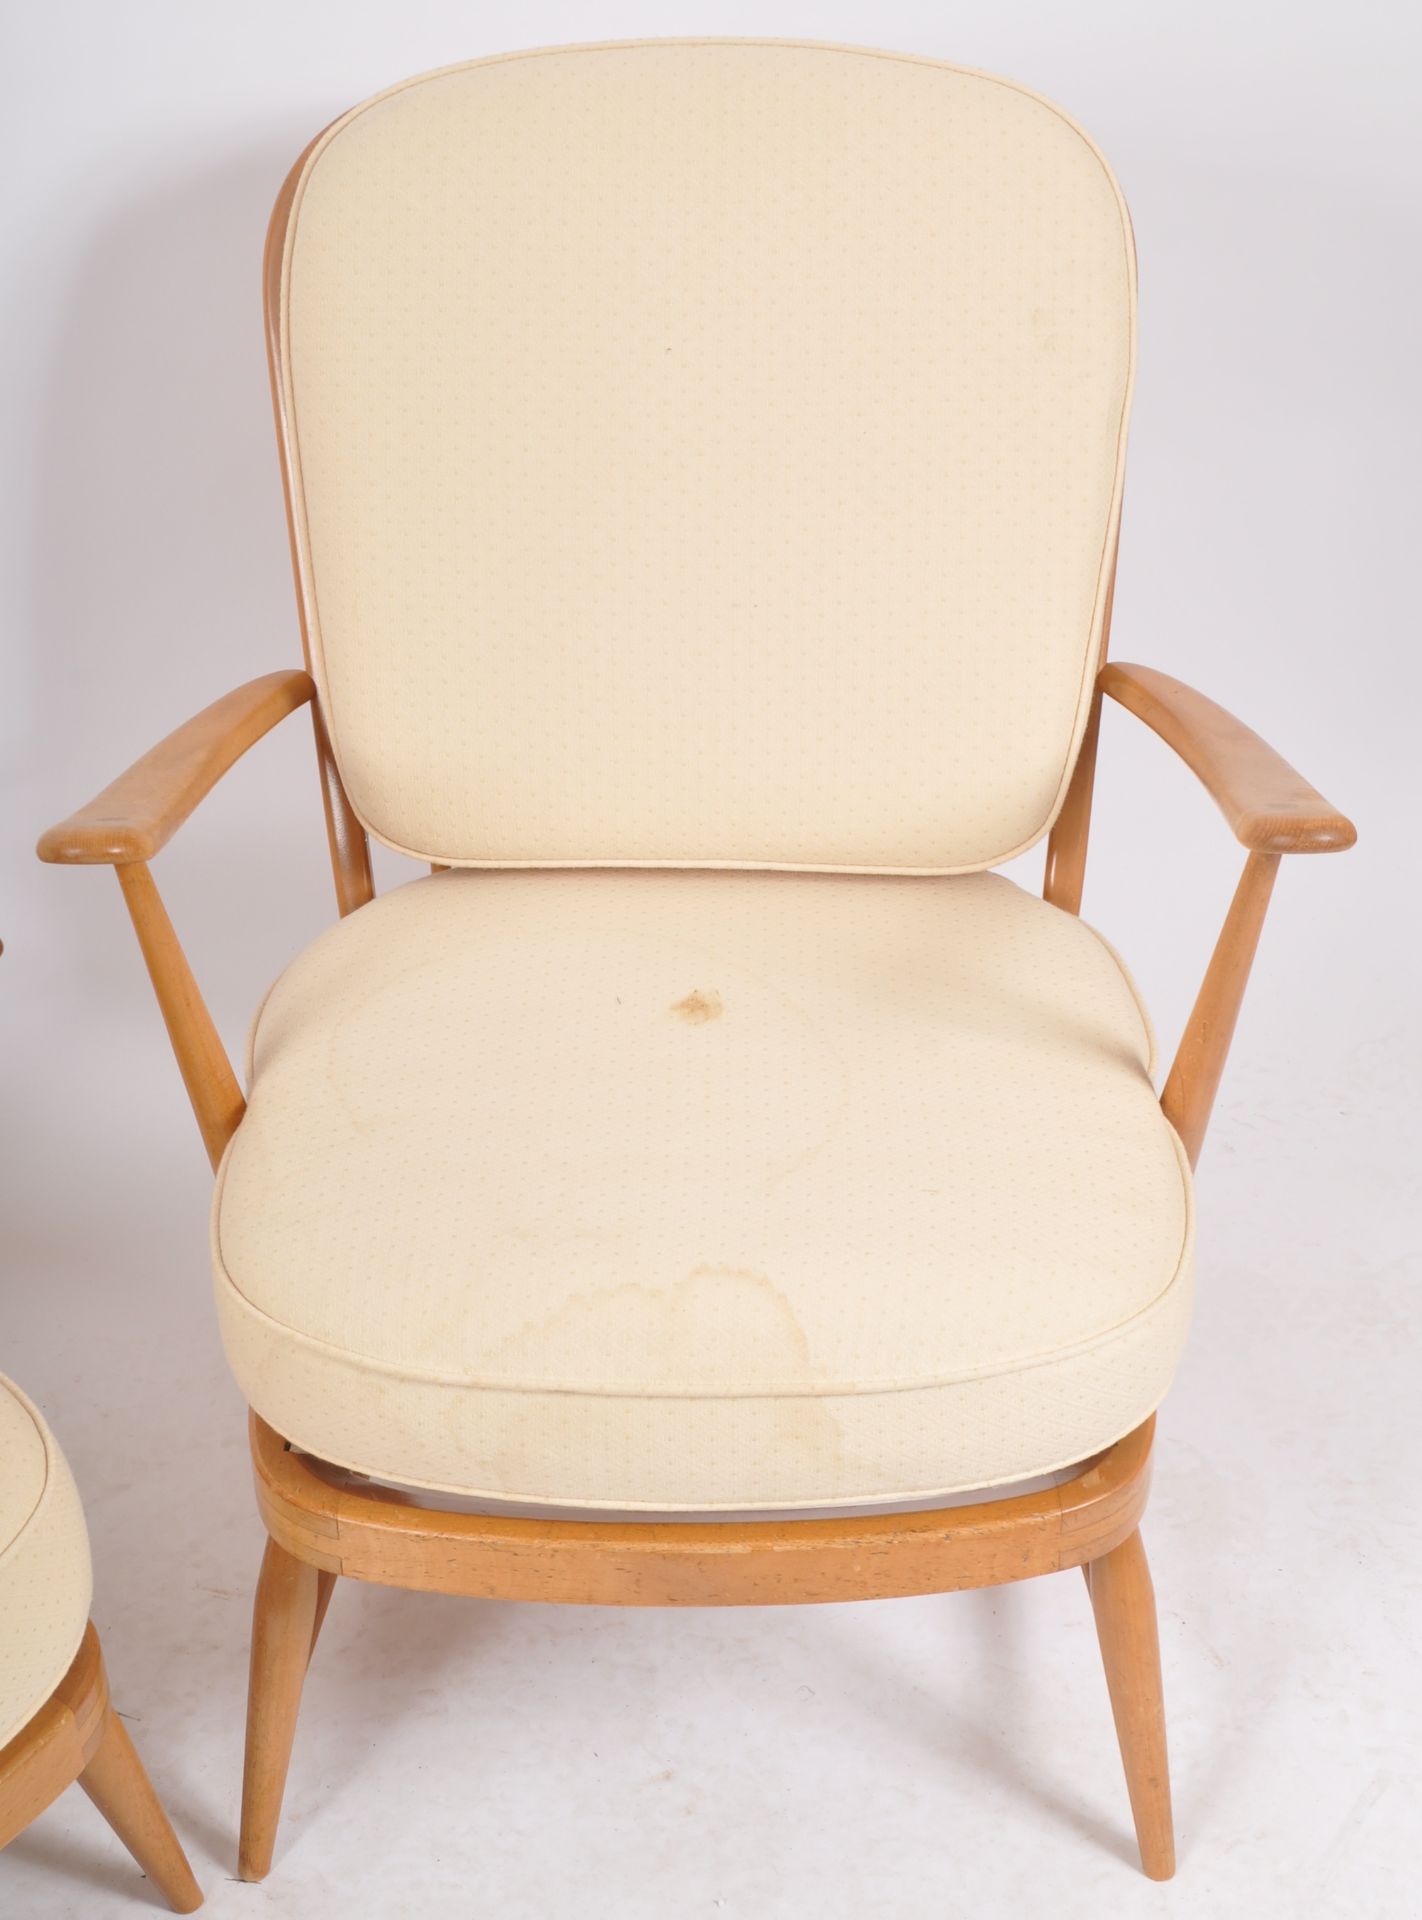 LUCIAN ERCOLANI - ERCOL MODEL 334 - PAIR ARMCHAIRS - Image 3 of 8